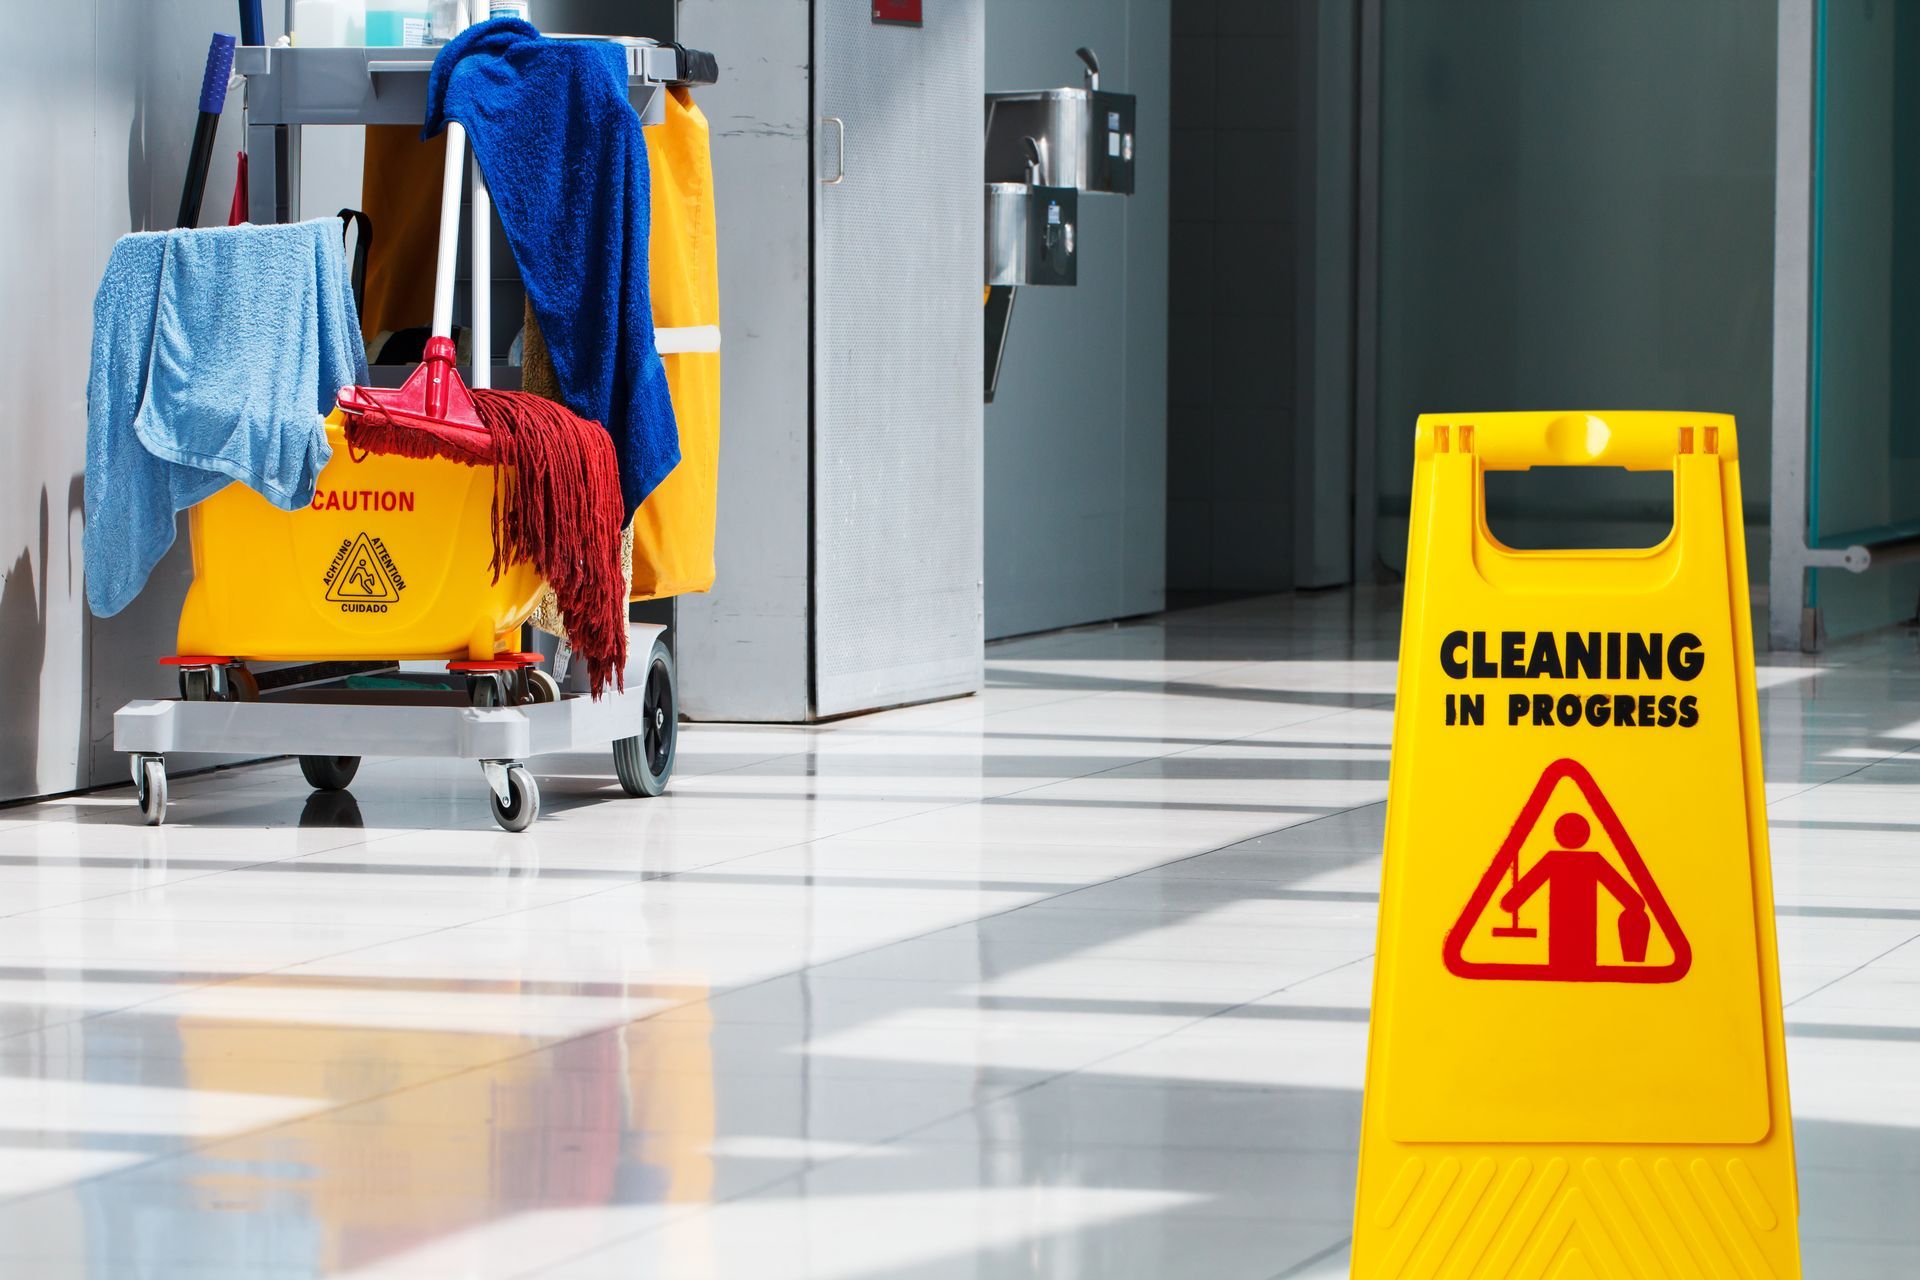 A cleaning cart in front of the office lobby bathrooms with a cleaning in progress sign on display.